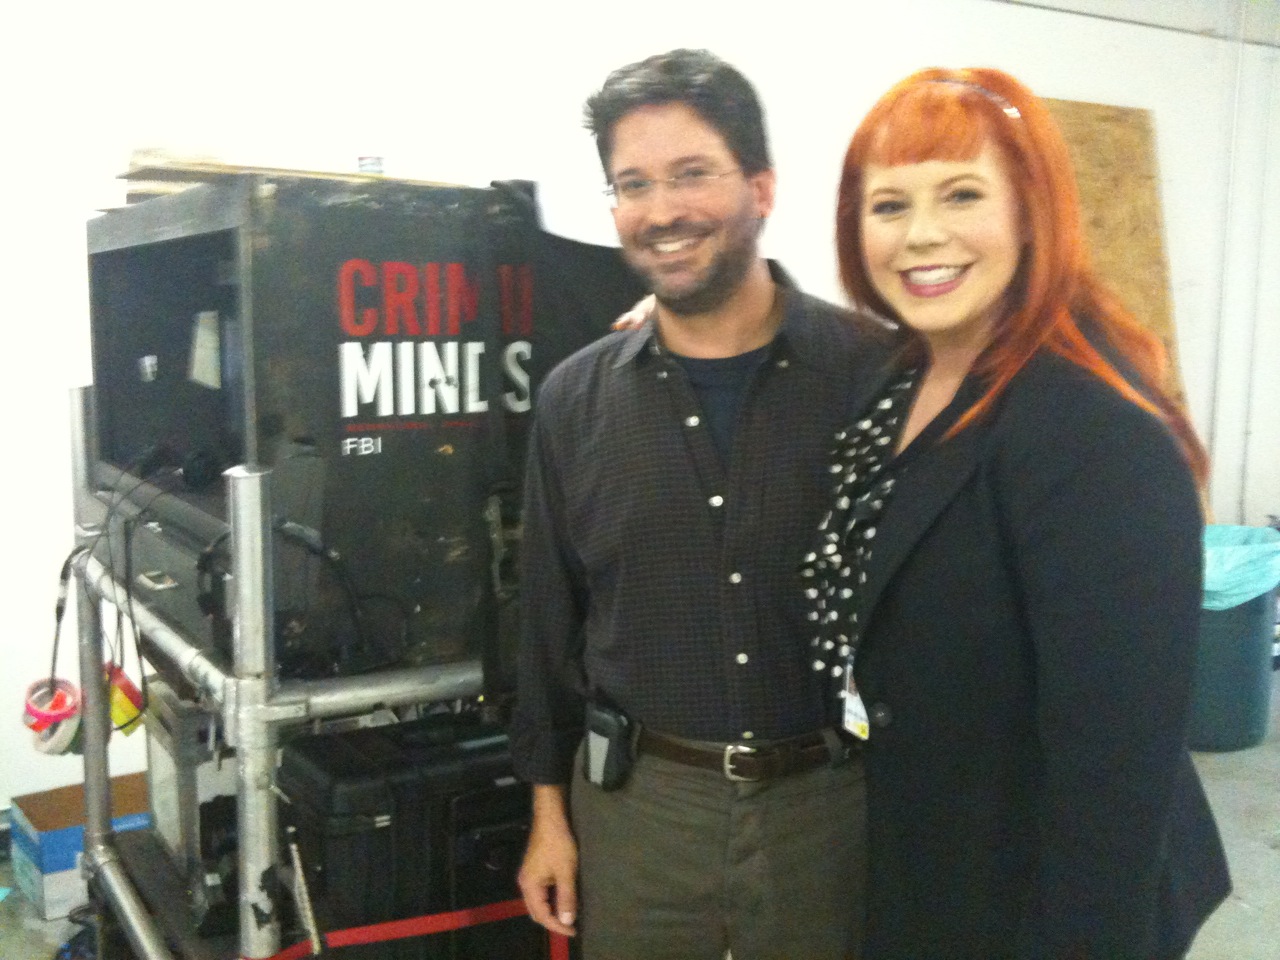 Kiff Scholl and Kirsten Vangsness on the set of Criminal Minds.